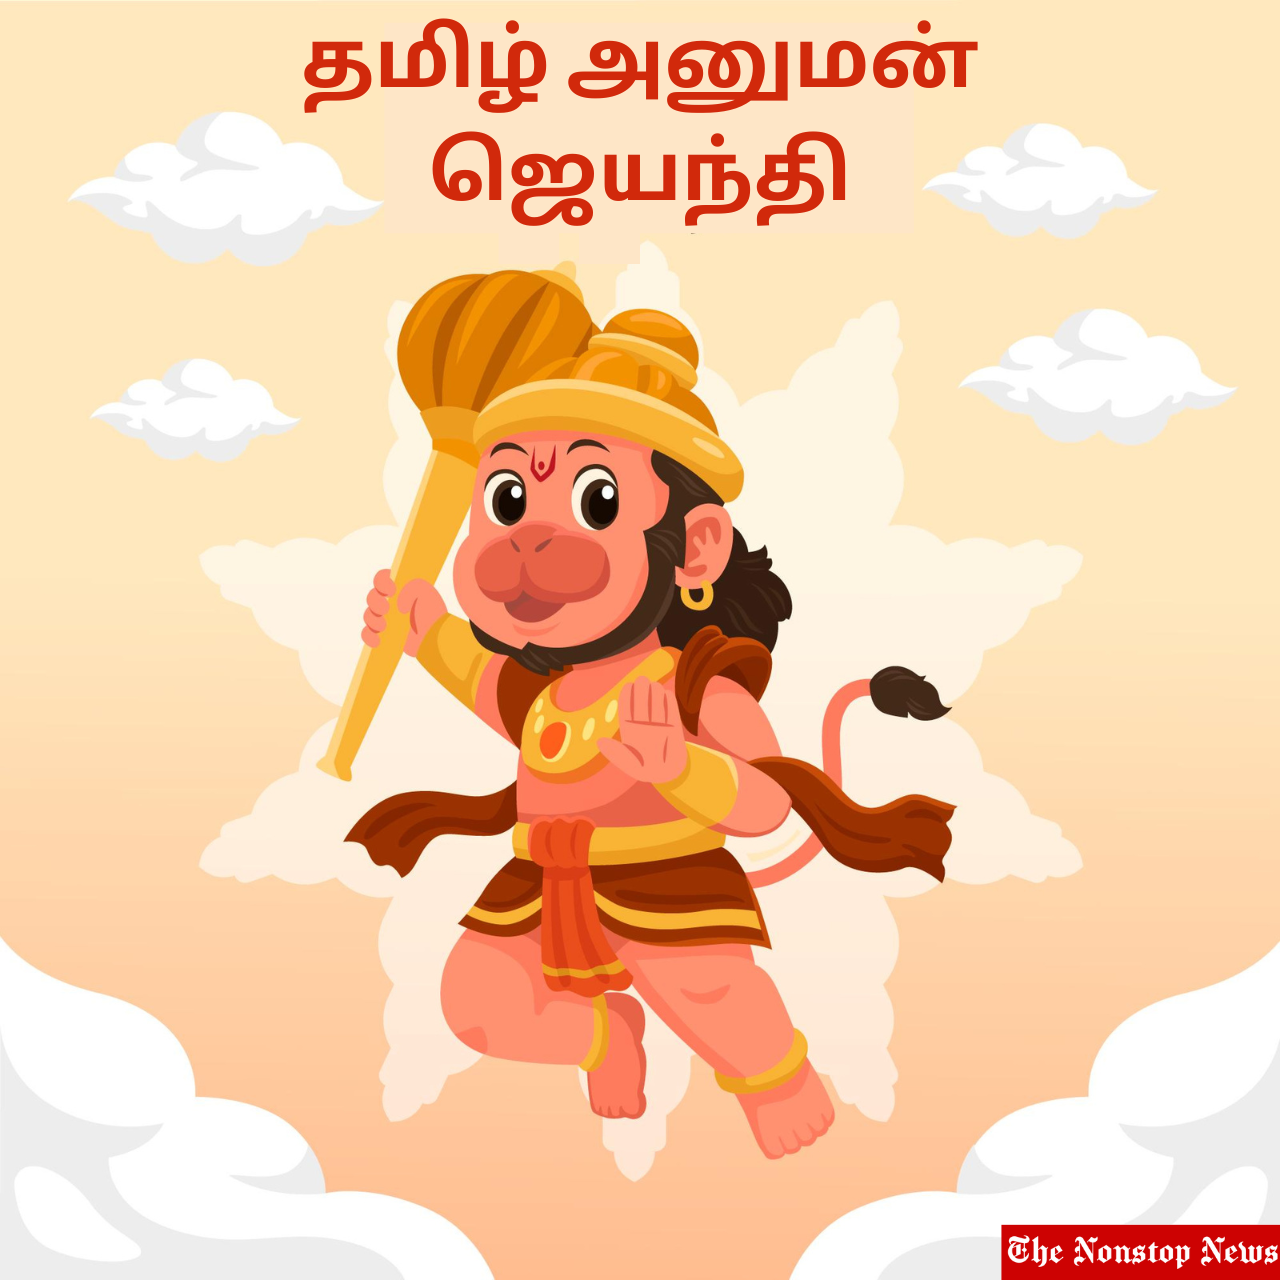 Tamil Hanuman Jayanti 2022 Wishes, Messages, Quotes, Greetings, and HD Images